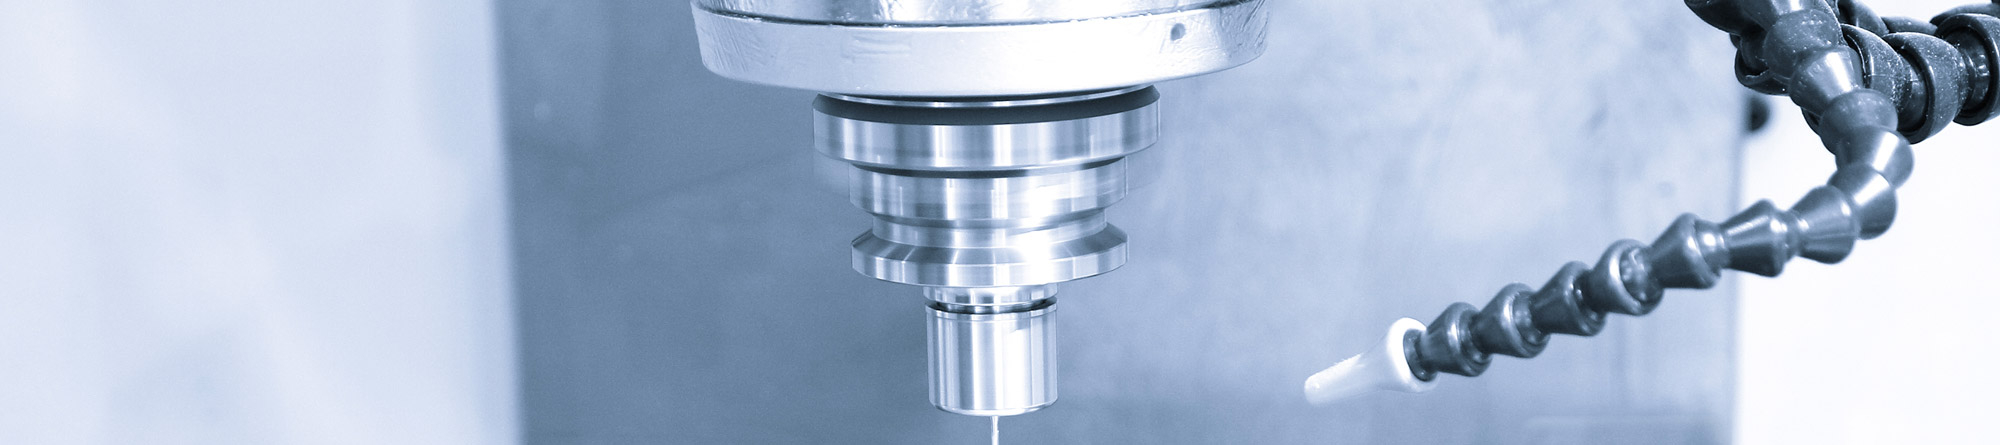 586-GHT5 HEAD DEVICE FOR MILLING AND DRILLING